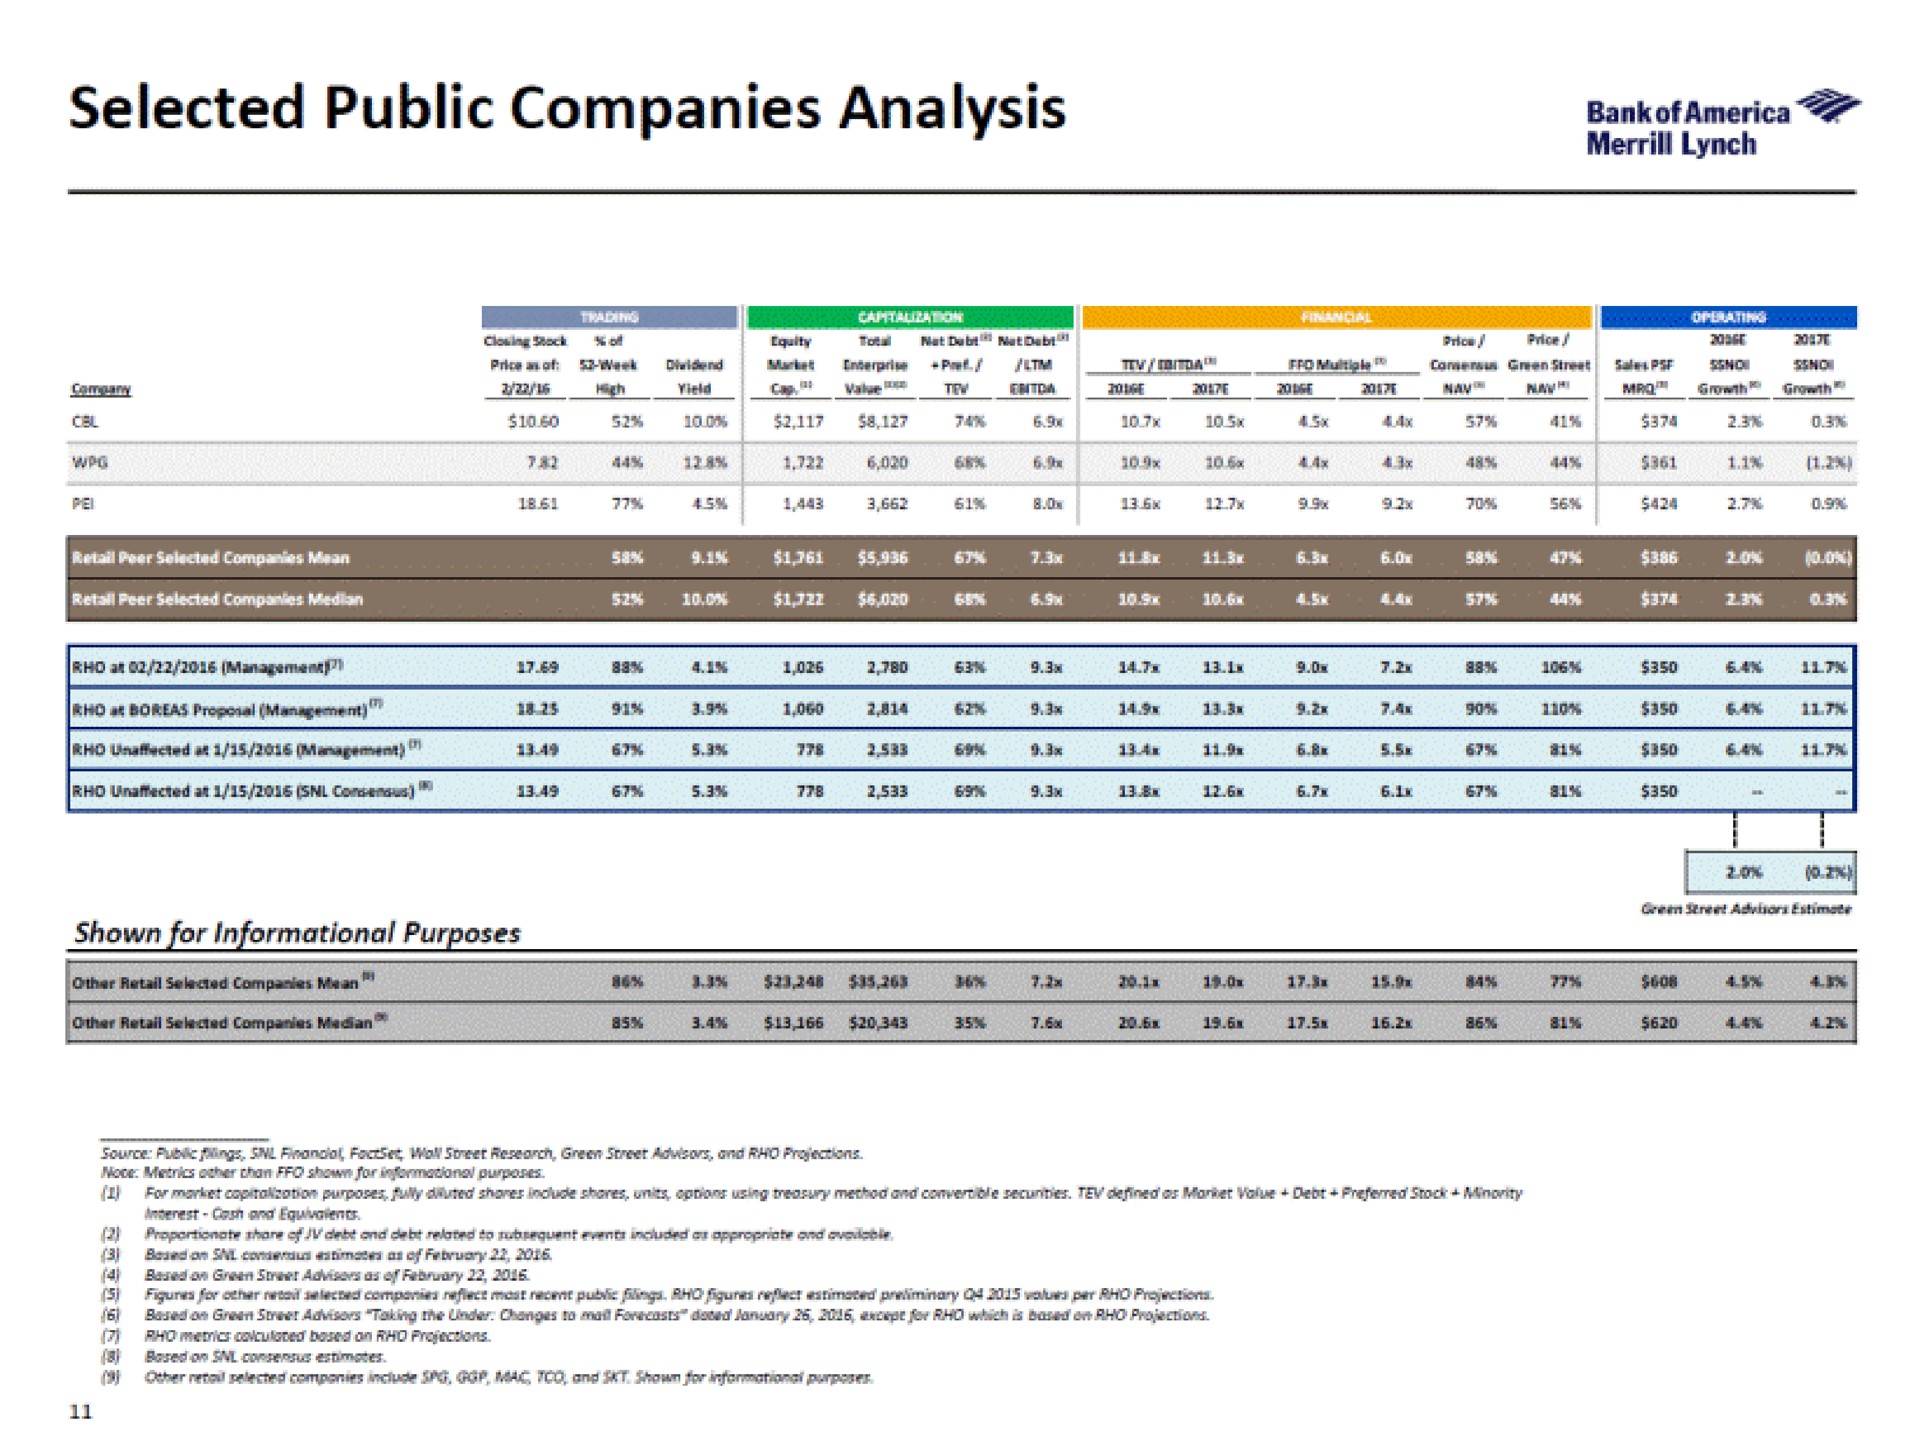 selected public companies analysis | Bank of America